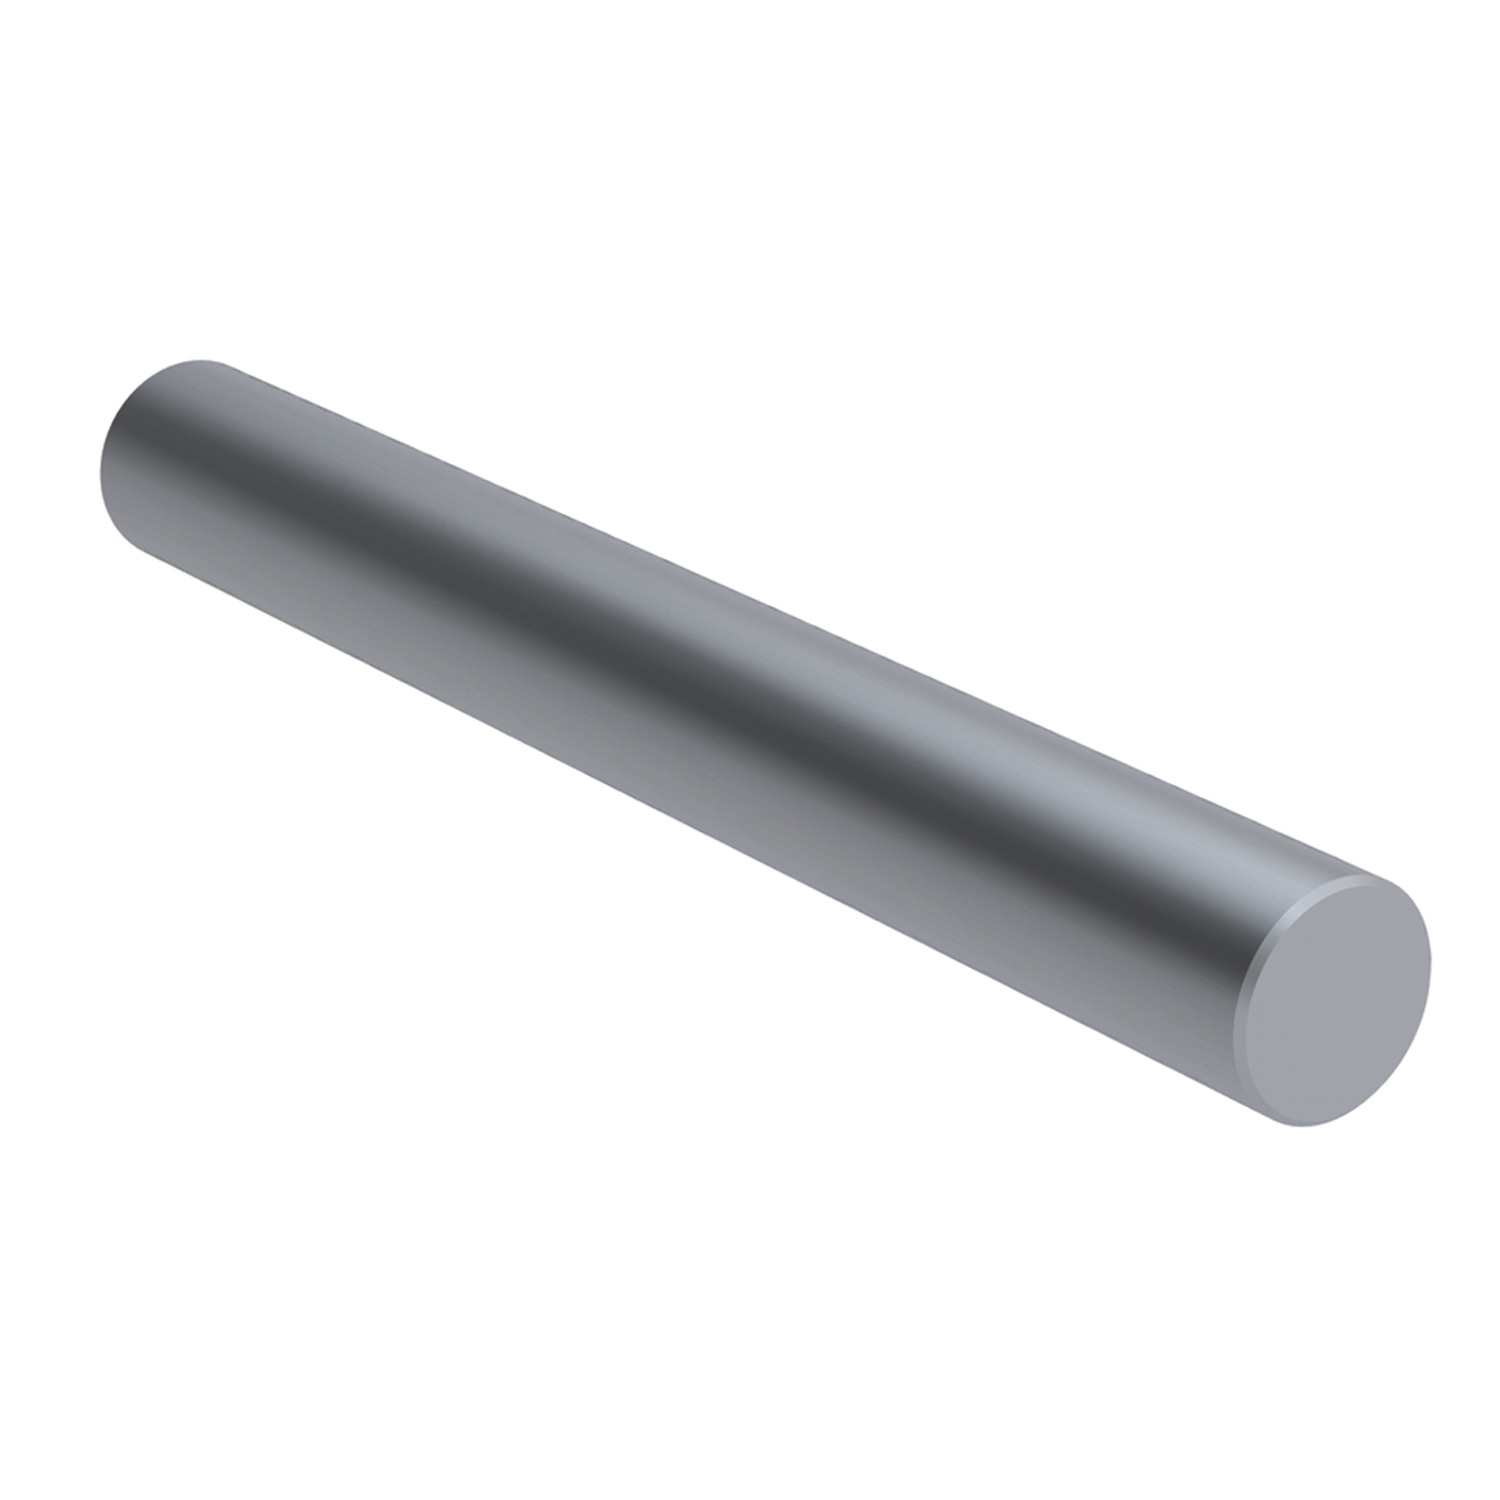 6Ø Stainless AISI 303 Shafts Stainless steel (AISI 303) linear shafting. Soft shafting for use with ceramic bearings.